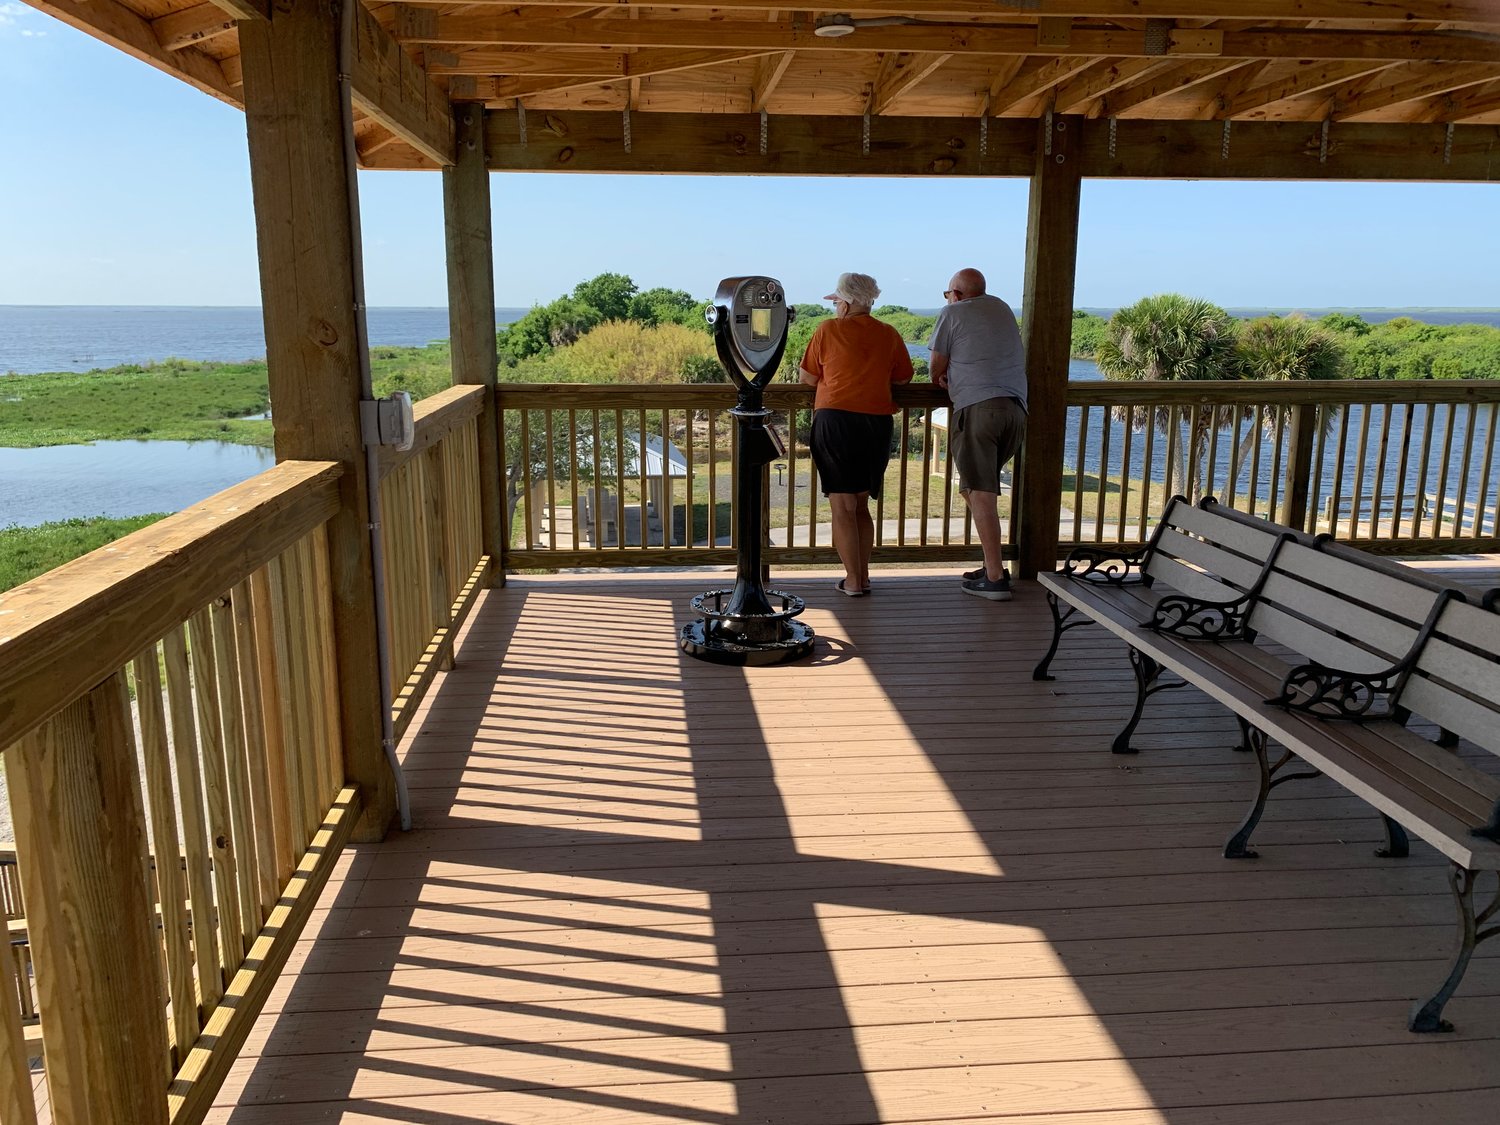 On the top tier of the platform, the observation deck has a tower viewer device for those who want to get a closer look at something on the lake.